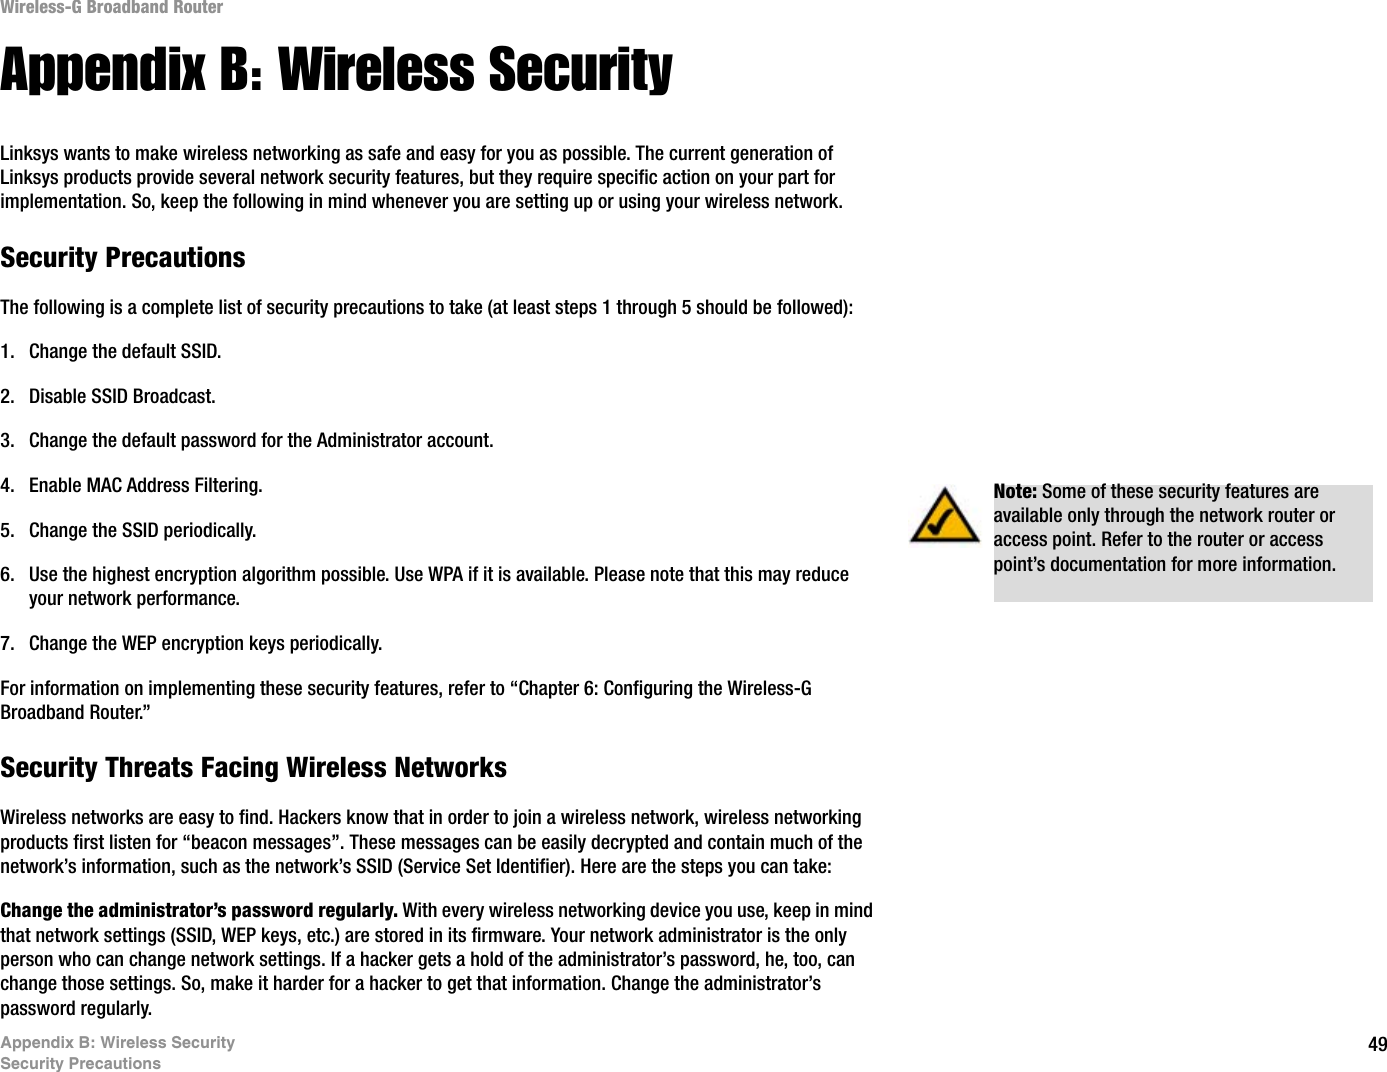 49Appendix B: Wireless SecuritySecurity PrecautionsWireless-G Broadband RouterAppendix B: Wireless SecurityLinksys wants to make wireless networking as safe and easy for you as possible. The current generation of Linksys products provide several network security features, but they require specific action on your part for implementation. So, keep the following in mind whenever you are setting up or using your wireless network.Security PrecautionsThe following is a complete list of security precautions to take (at least steps 1 through 5 should be followed):1. Change the default SSID. 2. Disable SSID Broadcast. 3. Change the default password for the Administrator account. 4. Enable MAC Address Filtering. 5. Change the SSID periodically. 6. Use the highest encryption algorithm possible. Use WPA if it is available. Please note that this may reduce your network performance. 7. Change the WEP encryption keys periodically. For information on implementing these security features, refer to “Chapter 6: Configuring the Wireless-G Broadband Router.”Security Threats Facing Wireless Networks Wireless networks are easy to find. Hackers know that in order to join a wireless network, wireless networking products first listen for “beacon messages”. These messages can be easily decrypted and contain much of the network’s information, such as the network’s SSID (Service Set Identifier). Here are the steps you can take:Change the administrator’s password regularly. With every wireless networking device you use, keep in mind that network settings (SSID, WEP keys, etc.) are stored in its firmware. Your network administrator is the only person who can change network settings. If a hacker gets a hold of the administrator’s password, he, too, can change those settings. So, make it harder for a hacker to get that information. Change the administrator’s password regularly.Note: Some of these security features are available only through the network router or access point. Refer to the router or access point’s documentation for more information.